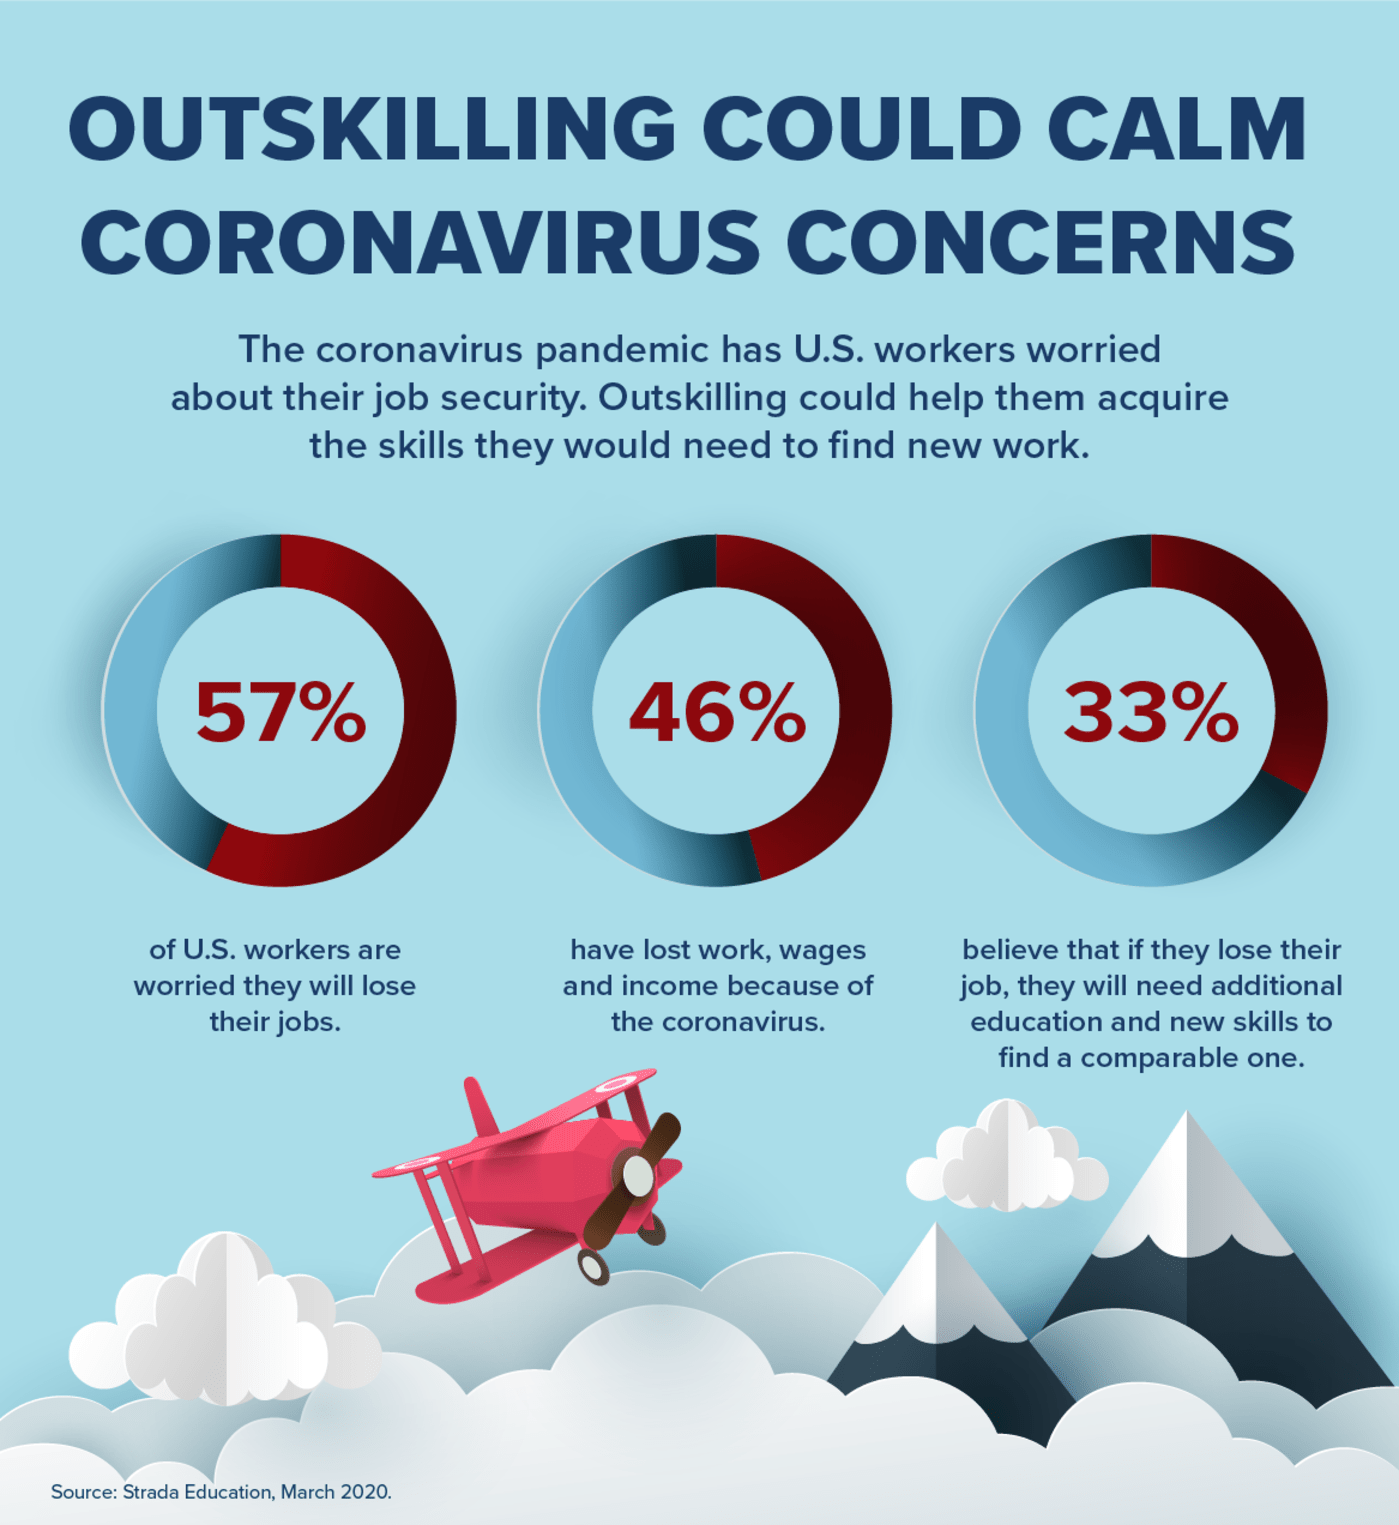 Outskilling Could Calm Coronavirus Concerns